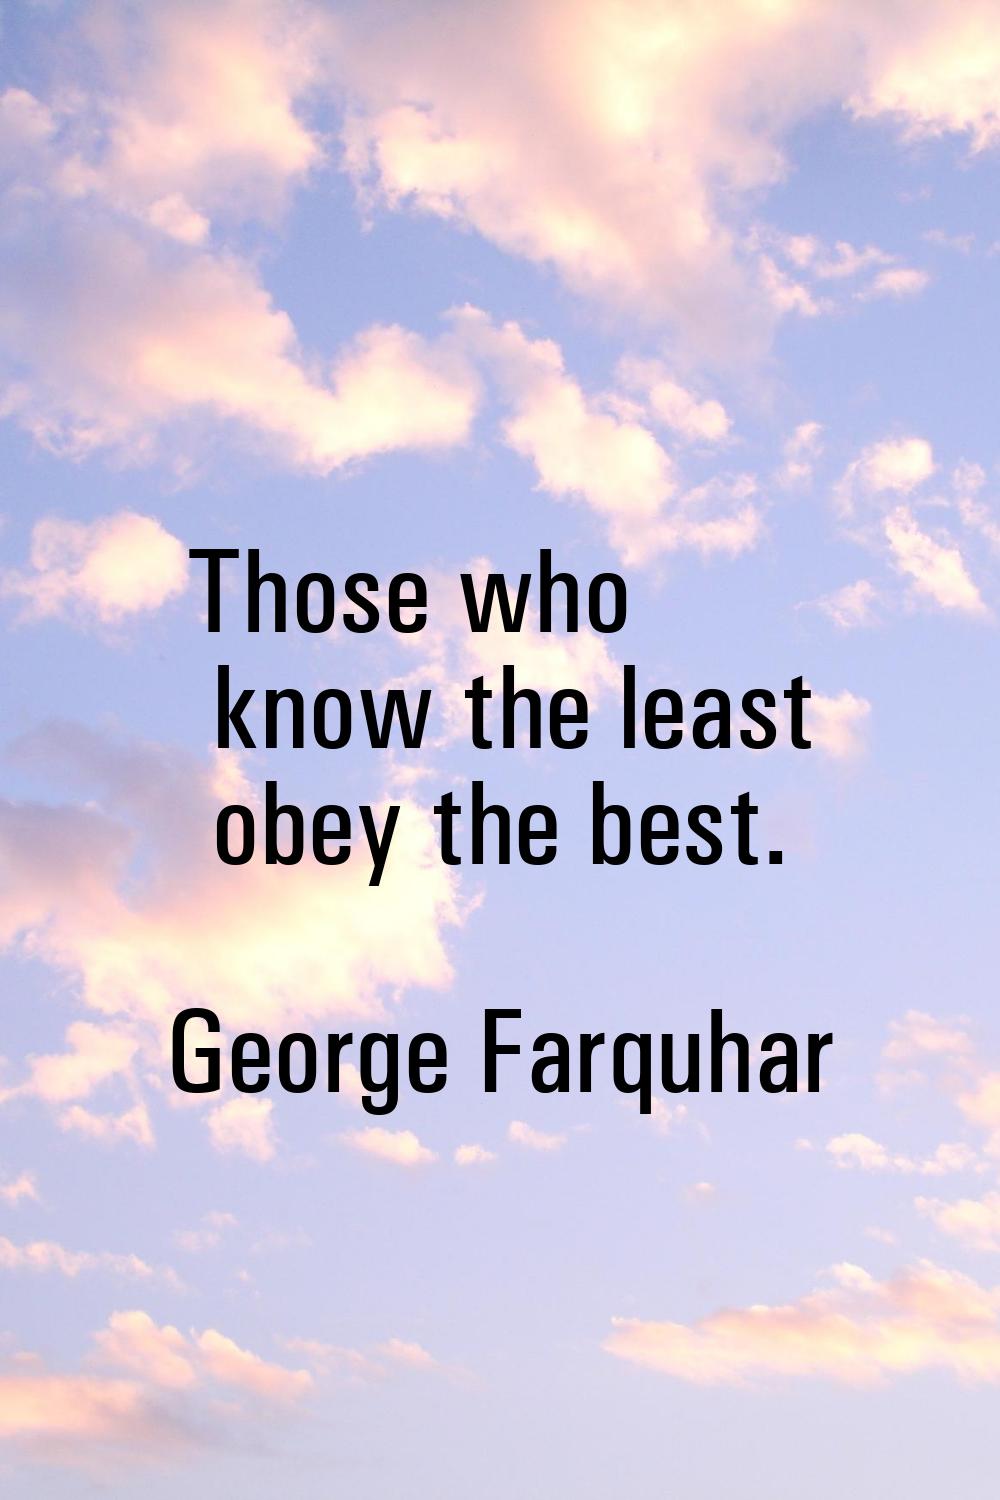 Those who know the least obey the best.